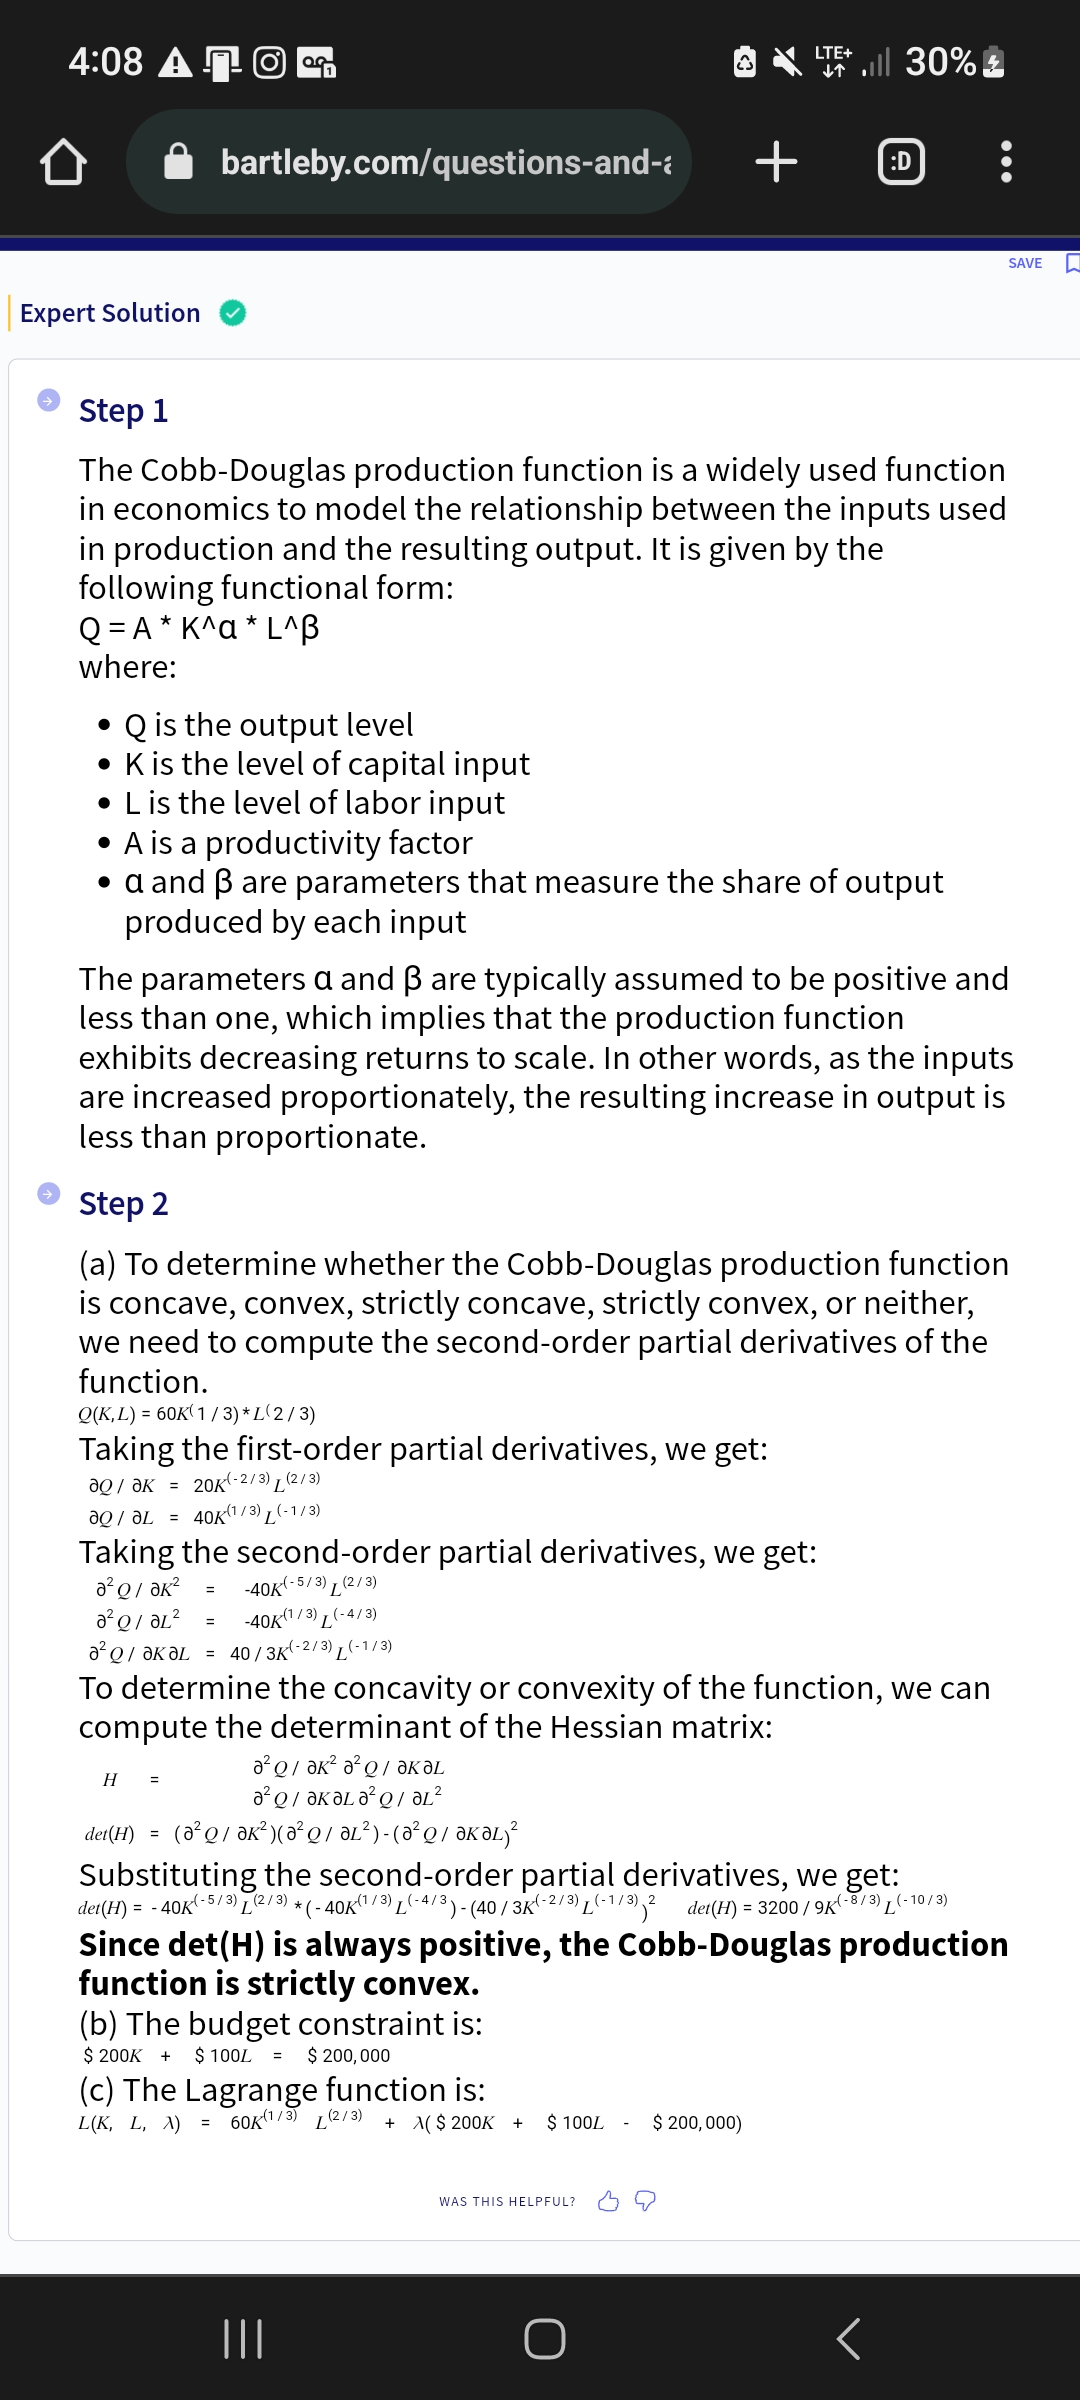 4:08 AO
Expert Solution
bartleby.com/questions-and-
• Q is the output level
• K is the level of capital input
• L is the level of labor input
Step 1
The Cobb-Douglas production function is a widely used function
in economics to model the relationship between the inputs used
in production and the resulting output. It is given by the
following functional form:
Q=A* K^a* L^B
where:
• A is a productivity factor
• a and ẞ are parameters that measure the share of output
produced by each input
²01²
-40K(1/3) L(-4/3)
Ə²Q/ƏKƏL = 40 / 3k K(-2/3) L(-1/3)
=
The parameters a and ß are typically assumed to be positive and
less than one, which implies that the production function
H =
exhibits decreasing returns to scale. In other words, as the inputs
are increased proportionately, the resulting increase in output is
less than proportionate.
Step 2
(a) To determine whether the Cobb-Douglas production function
is concave, convex, strictly concave, strictly convex, or neither,
we need to compute the second-order partial derivatives of the
function.
Q(K,L) = 60K(1/3)* L(2/3)
Taking the first-order partial derivatives, we get:
?Q / ?к = 20K(-2/3)(2/3)
aQ/L = 40K(1/3) (-1/3)
Taking the second-order partial derivatives, we get:
a²Q/ Ək²
= -40K K(-5/3) (2/3)
a²Q/ ak² a² QƏKƏL
²/ KA²²
det(H) = (a²Q/ƏK²) (A²Q/ ƏL²)-(0²Q / ƏKƏL)²
ŵ
LTE+
↓↑
To determine the concavity or convexity of the function, we can
compute the determinant of the Hessian matrix:
(b) The budget constraint is:
$ 200K + $ 100L = $ 200,000
all 30%
(c) The Lagrange function is:
L(K, L, X) = 60K(1/3) (2/3)
+ >($ 200K +
+ :D
|||
det(H) = -40K
(-5/3) T
(2/3),
Substituting the second-order partial derivatives, we get:
*(-40K(¹/3) L(-4/3) - (40/3K-2/3) L(-1/3) 2 det(H) = 3200/9K(-8/3) (-10/3)
Since det(H) is always positive, the Cobb-Douglas production
function is strictly convex.
$ 100L
WAS THIS HELPFUL?
$ 200,000)
SAVE